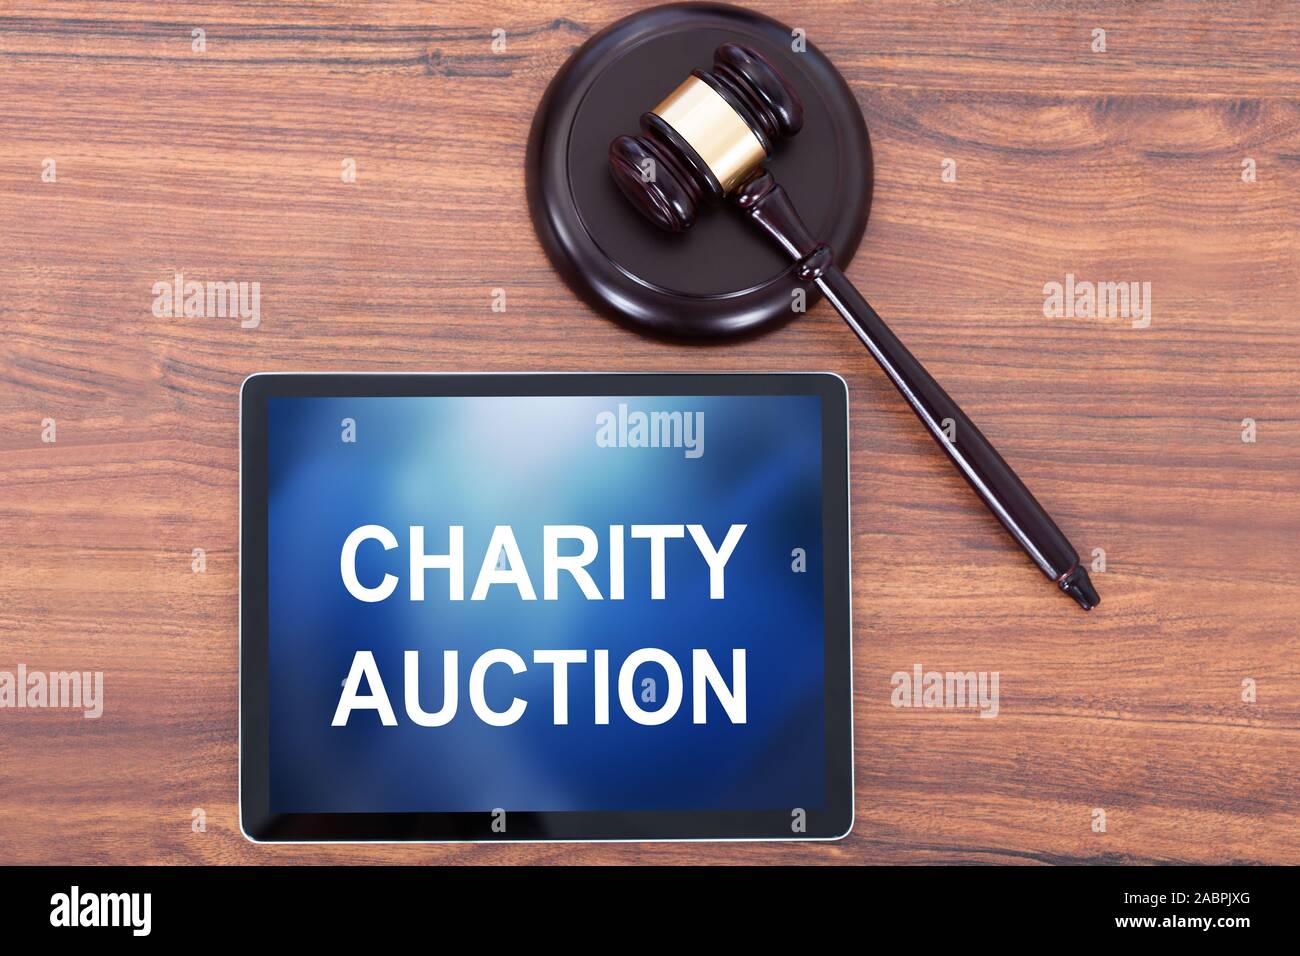 Elevated View Of Charity Auction Word On Digital Tablet Near Judge Gavel And Striking Block Stock Photo